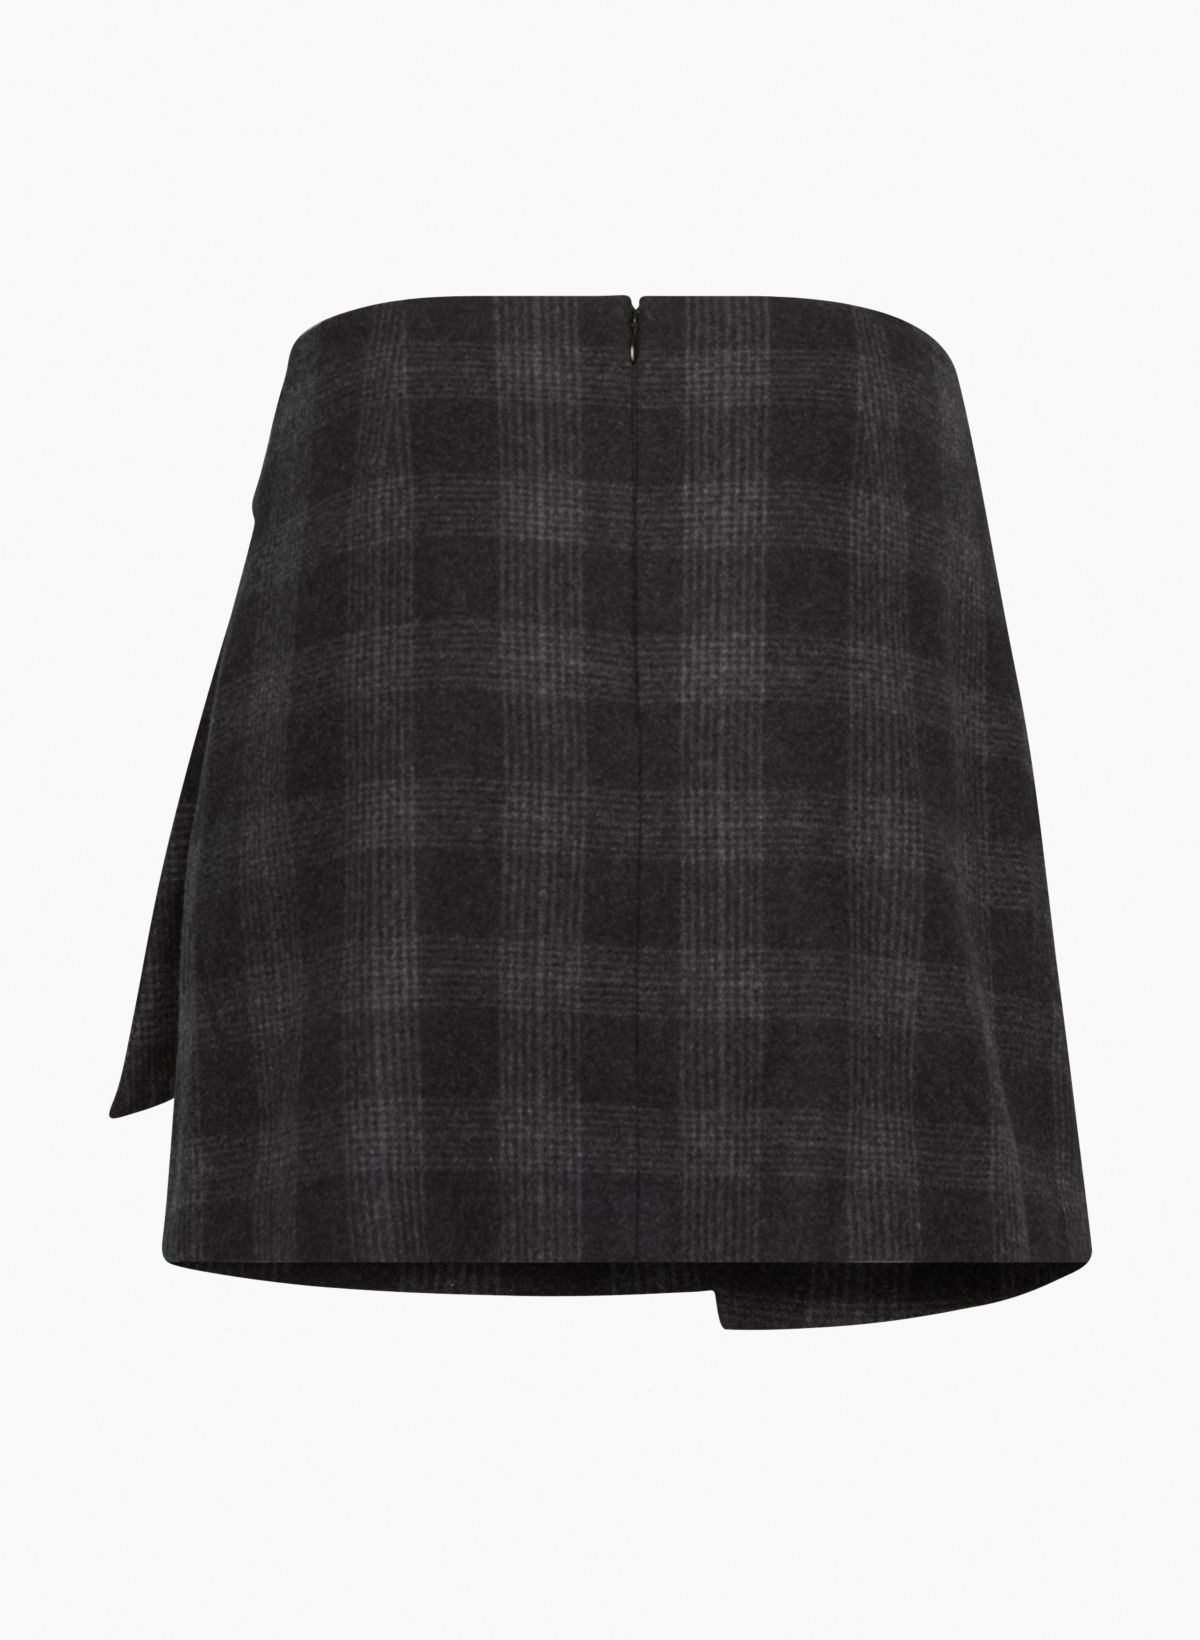 Make Any of These 26 Preppy Plaid Skirts the Star of Your Plaid Skirt  Outfits This Fall